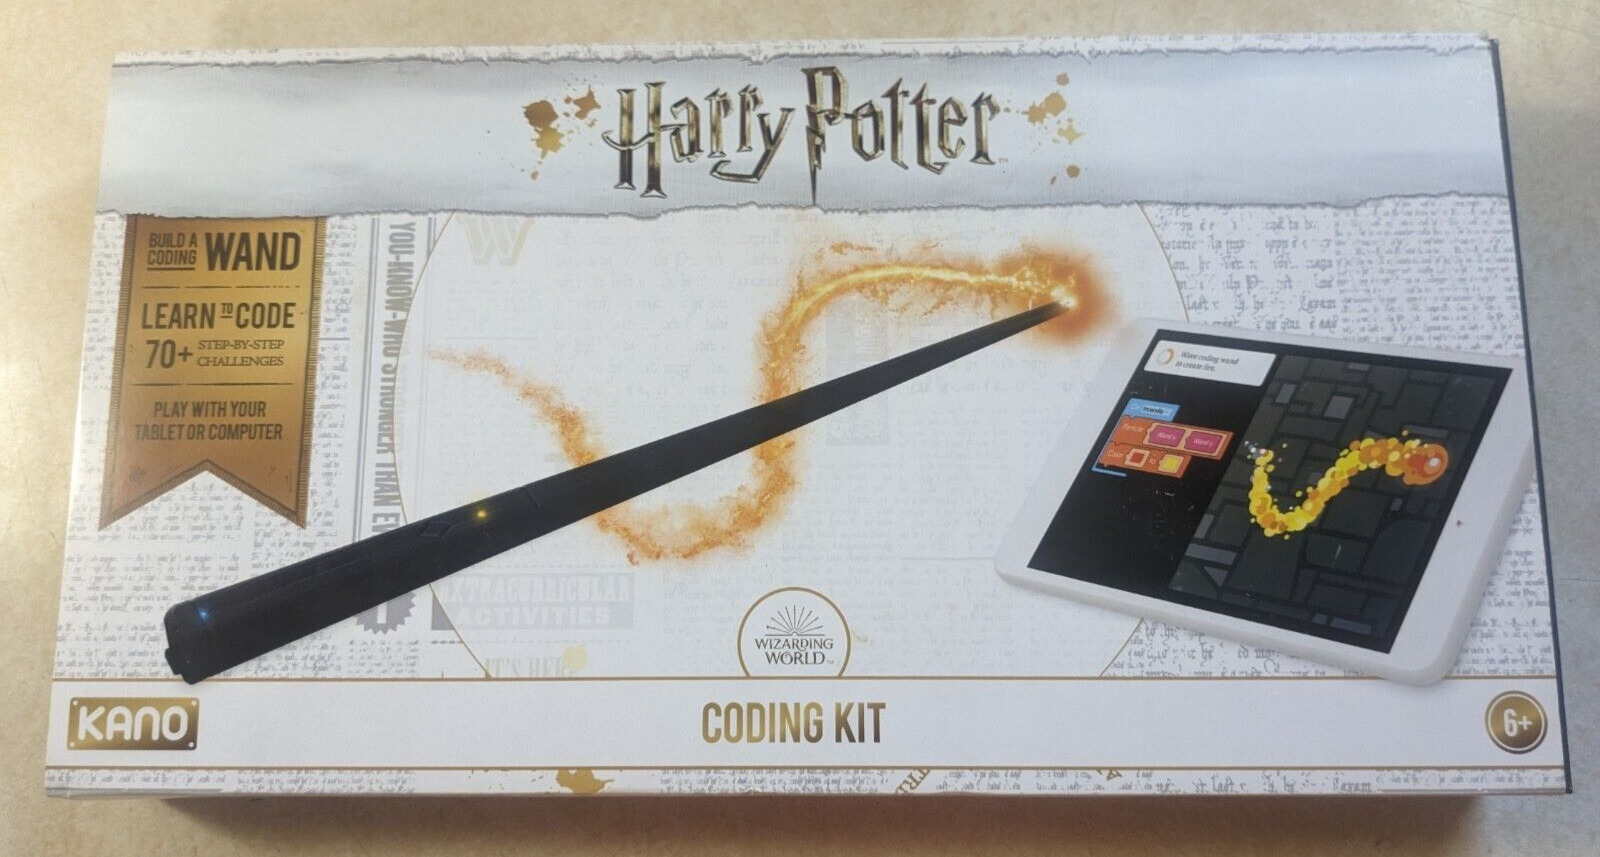 Kano Harry Potter Coding Kit - Build a Wand Learn To Code Open Box